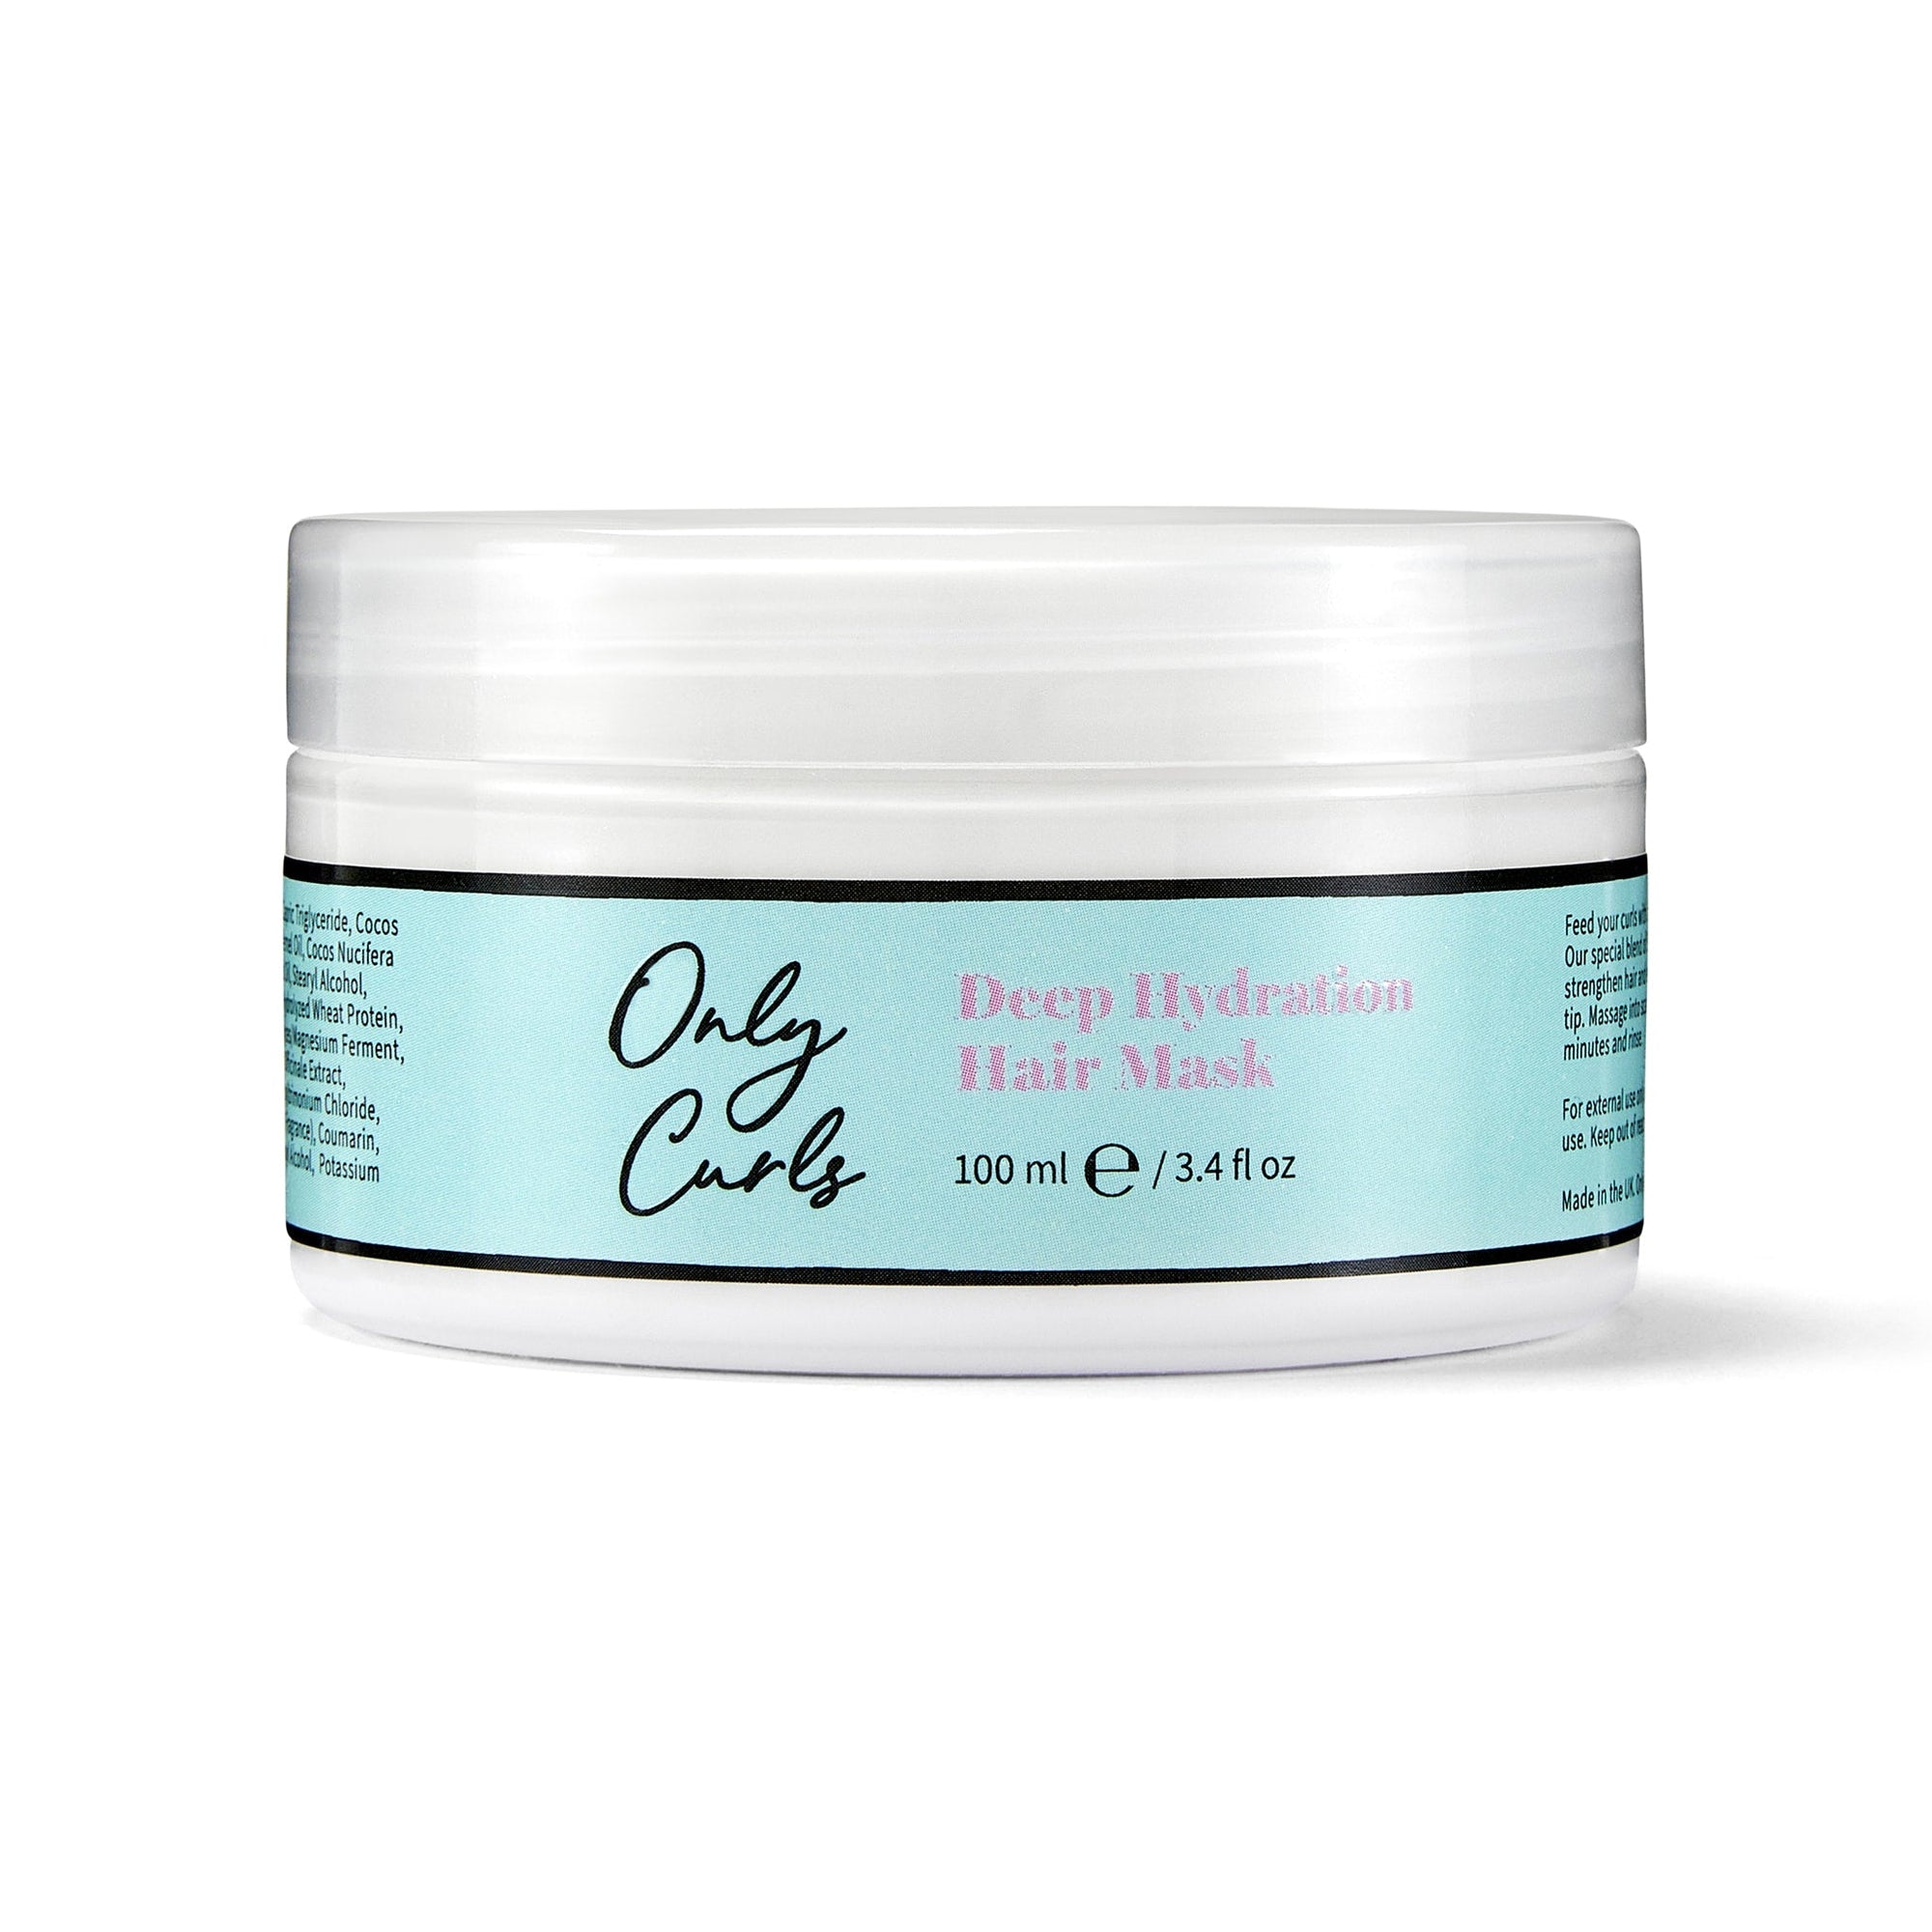 Only Curls Deep Hydration Hair Mask 100ml sample size